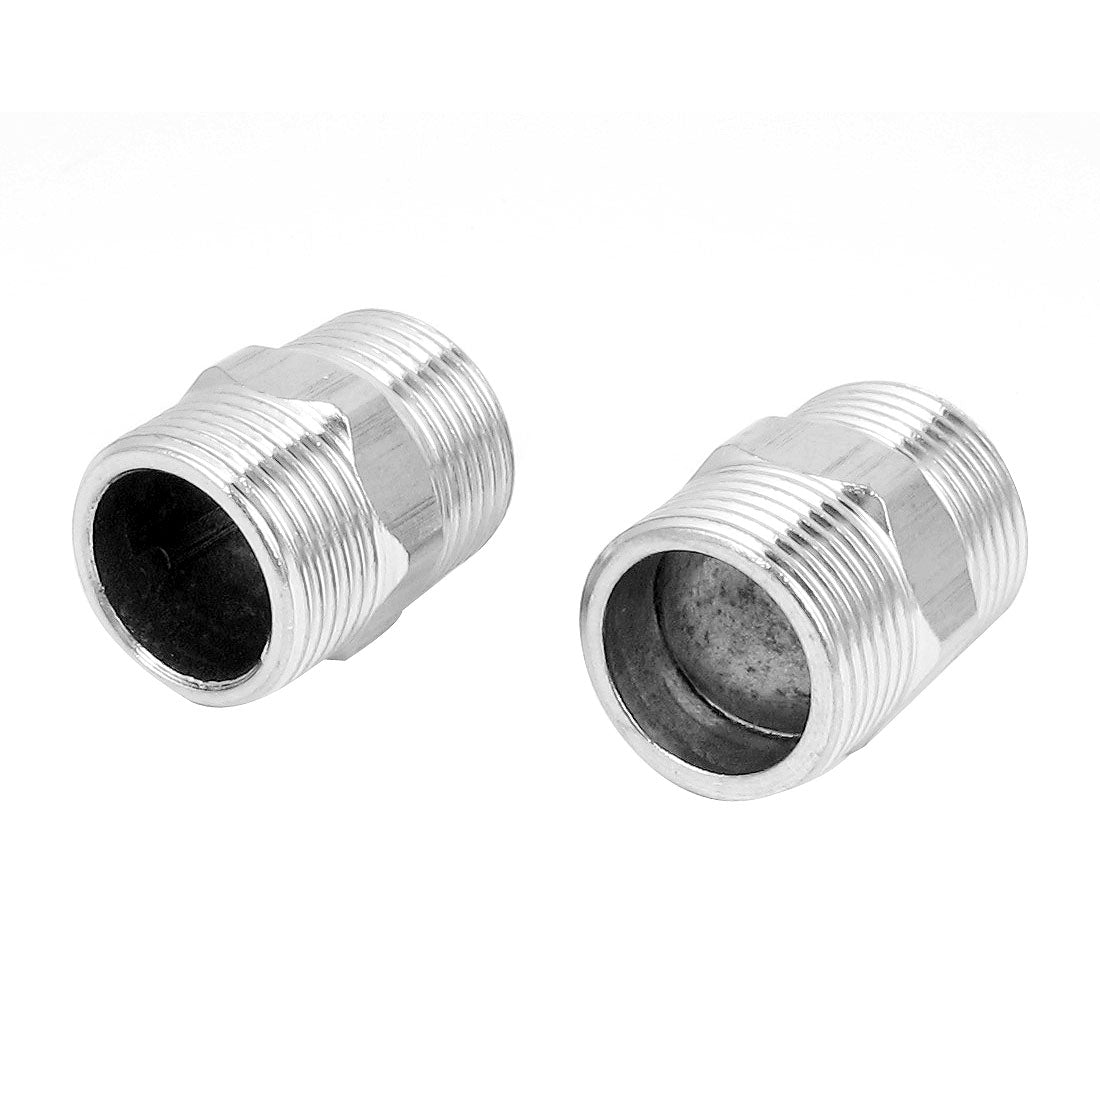 Uxcell Uxcell 1/2BSP Male to Male Threaded 304 Stainless Steel Hex Nipple Pipe Fitting 2pcs